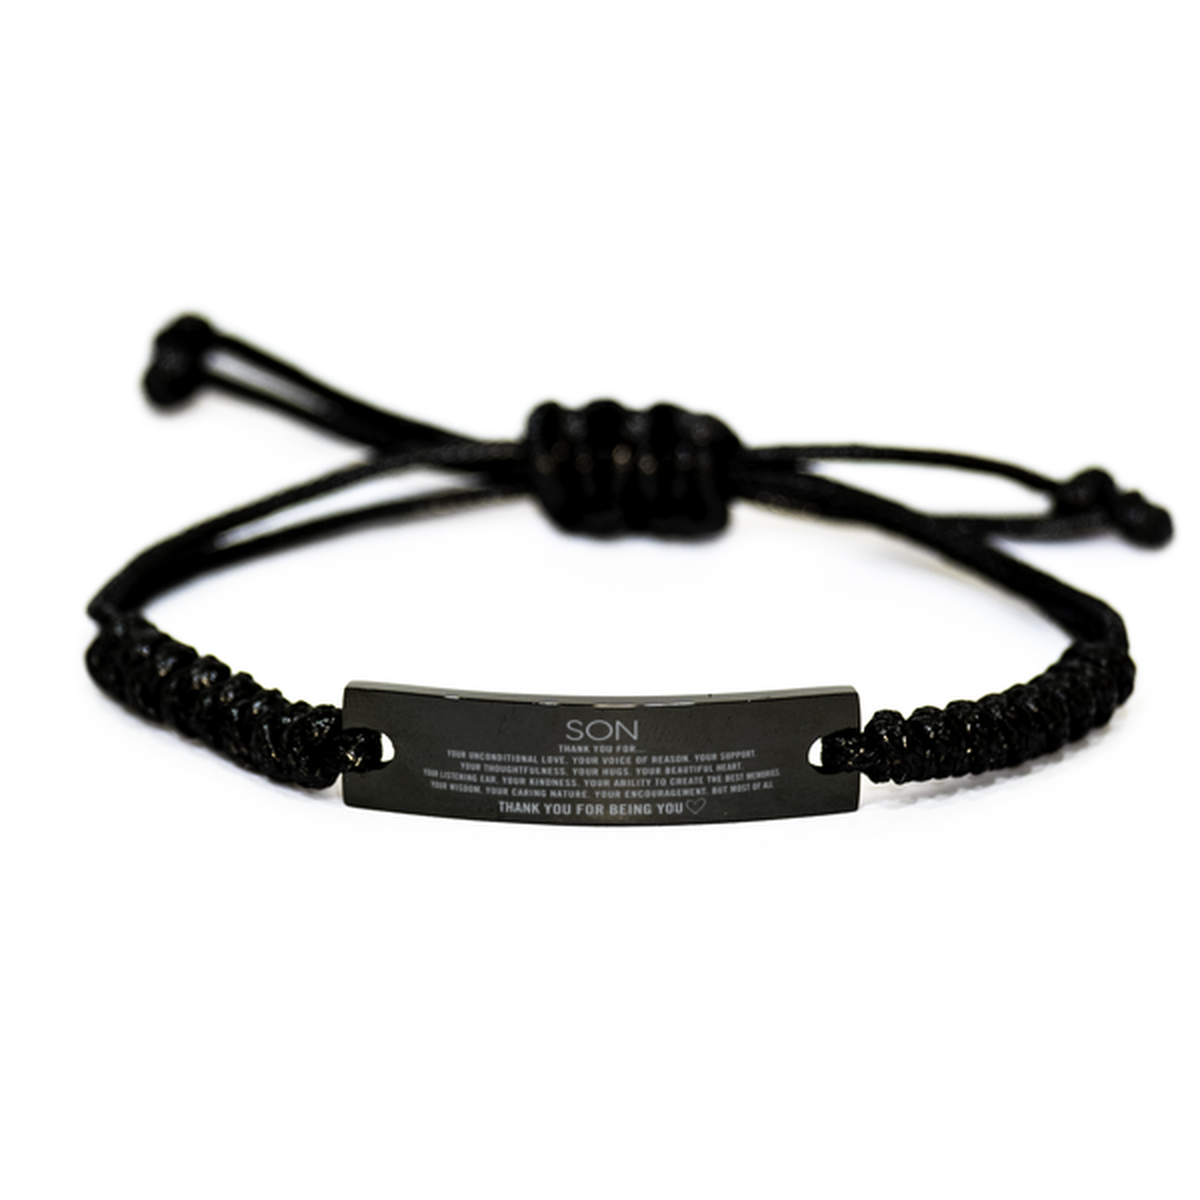 Son Black Rope Bracelet Custom, Engraved Gifts For Son Christmas Graduation Birthday Gifts for Men Women Son Thank you for Your unconditional love